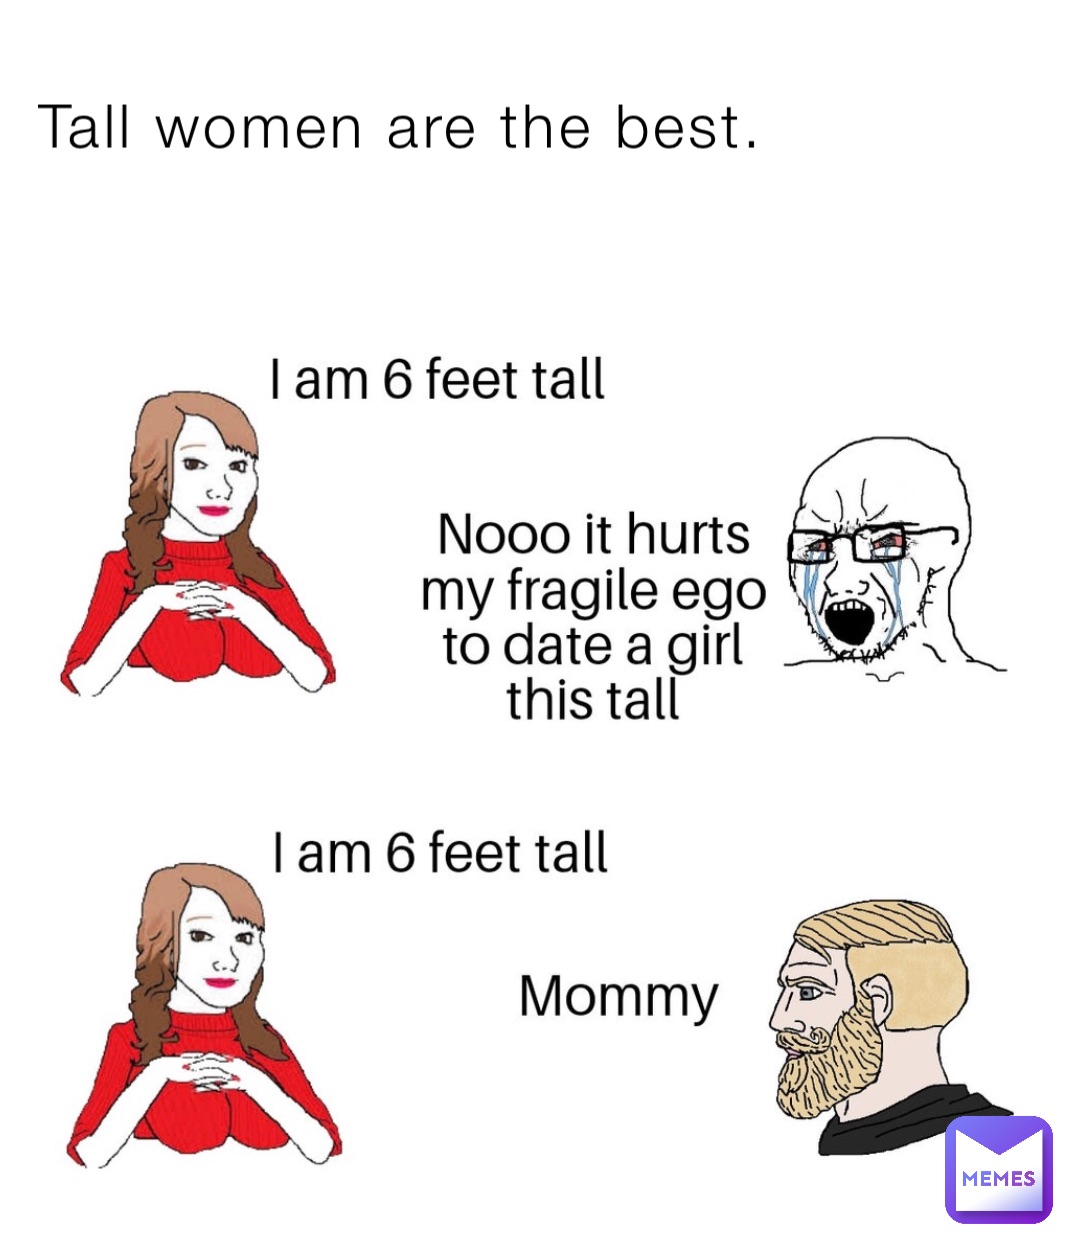 Tall women are the best.